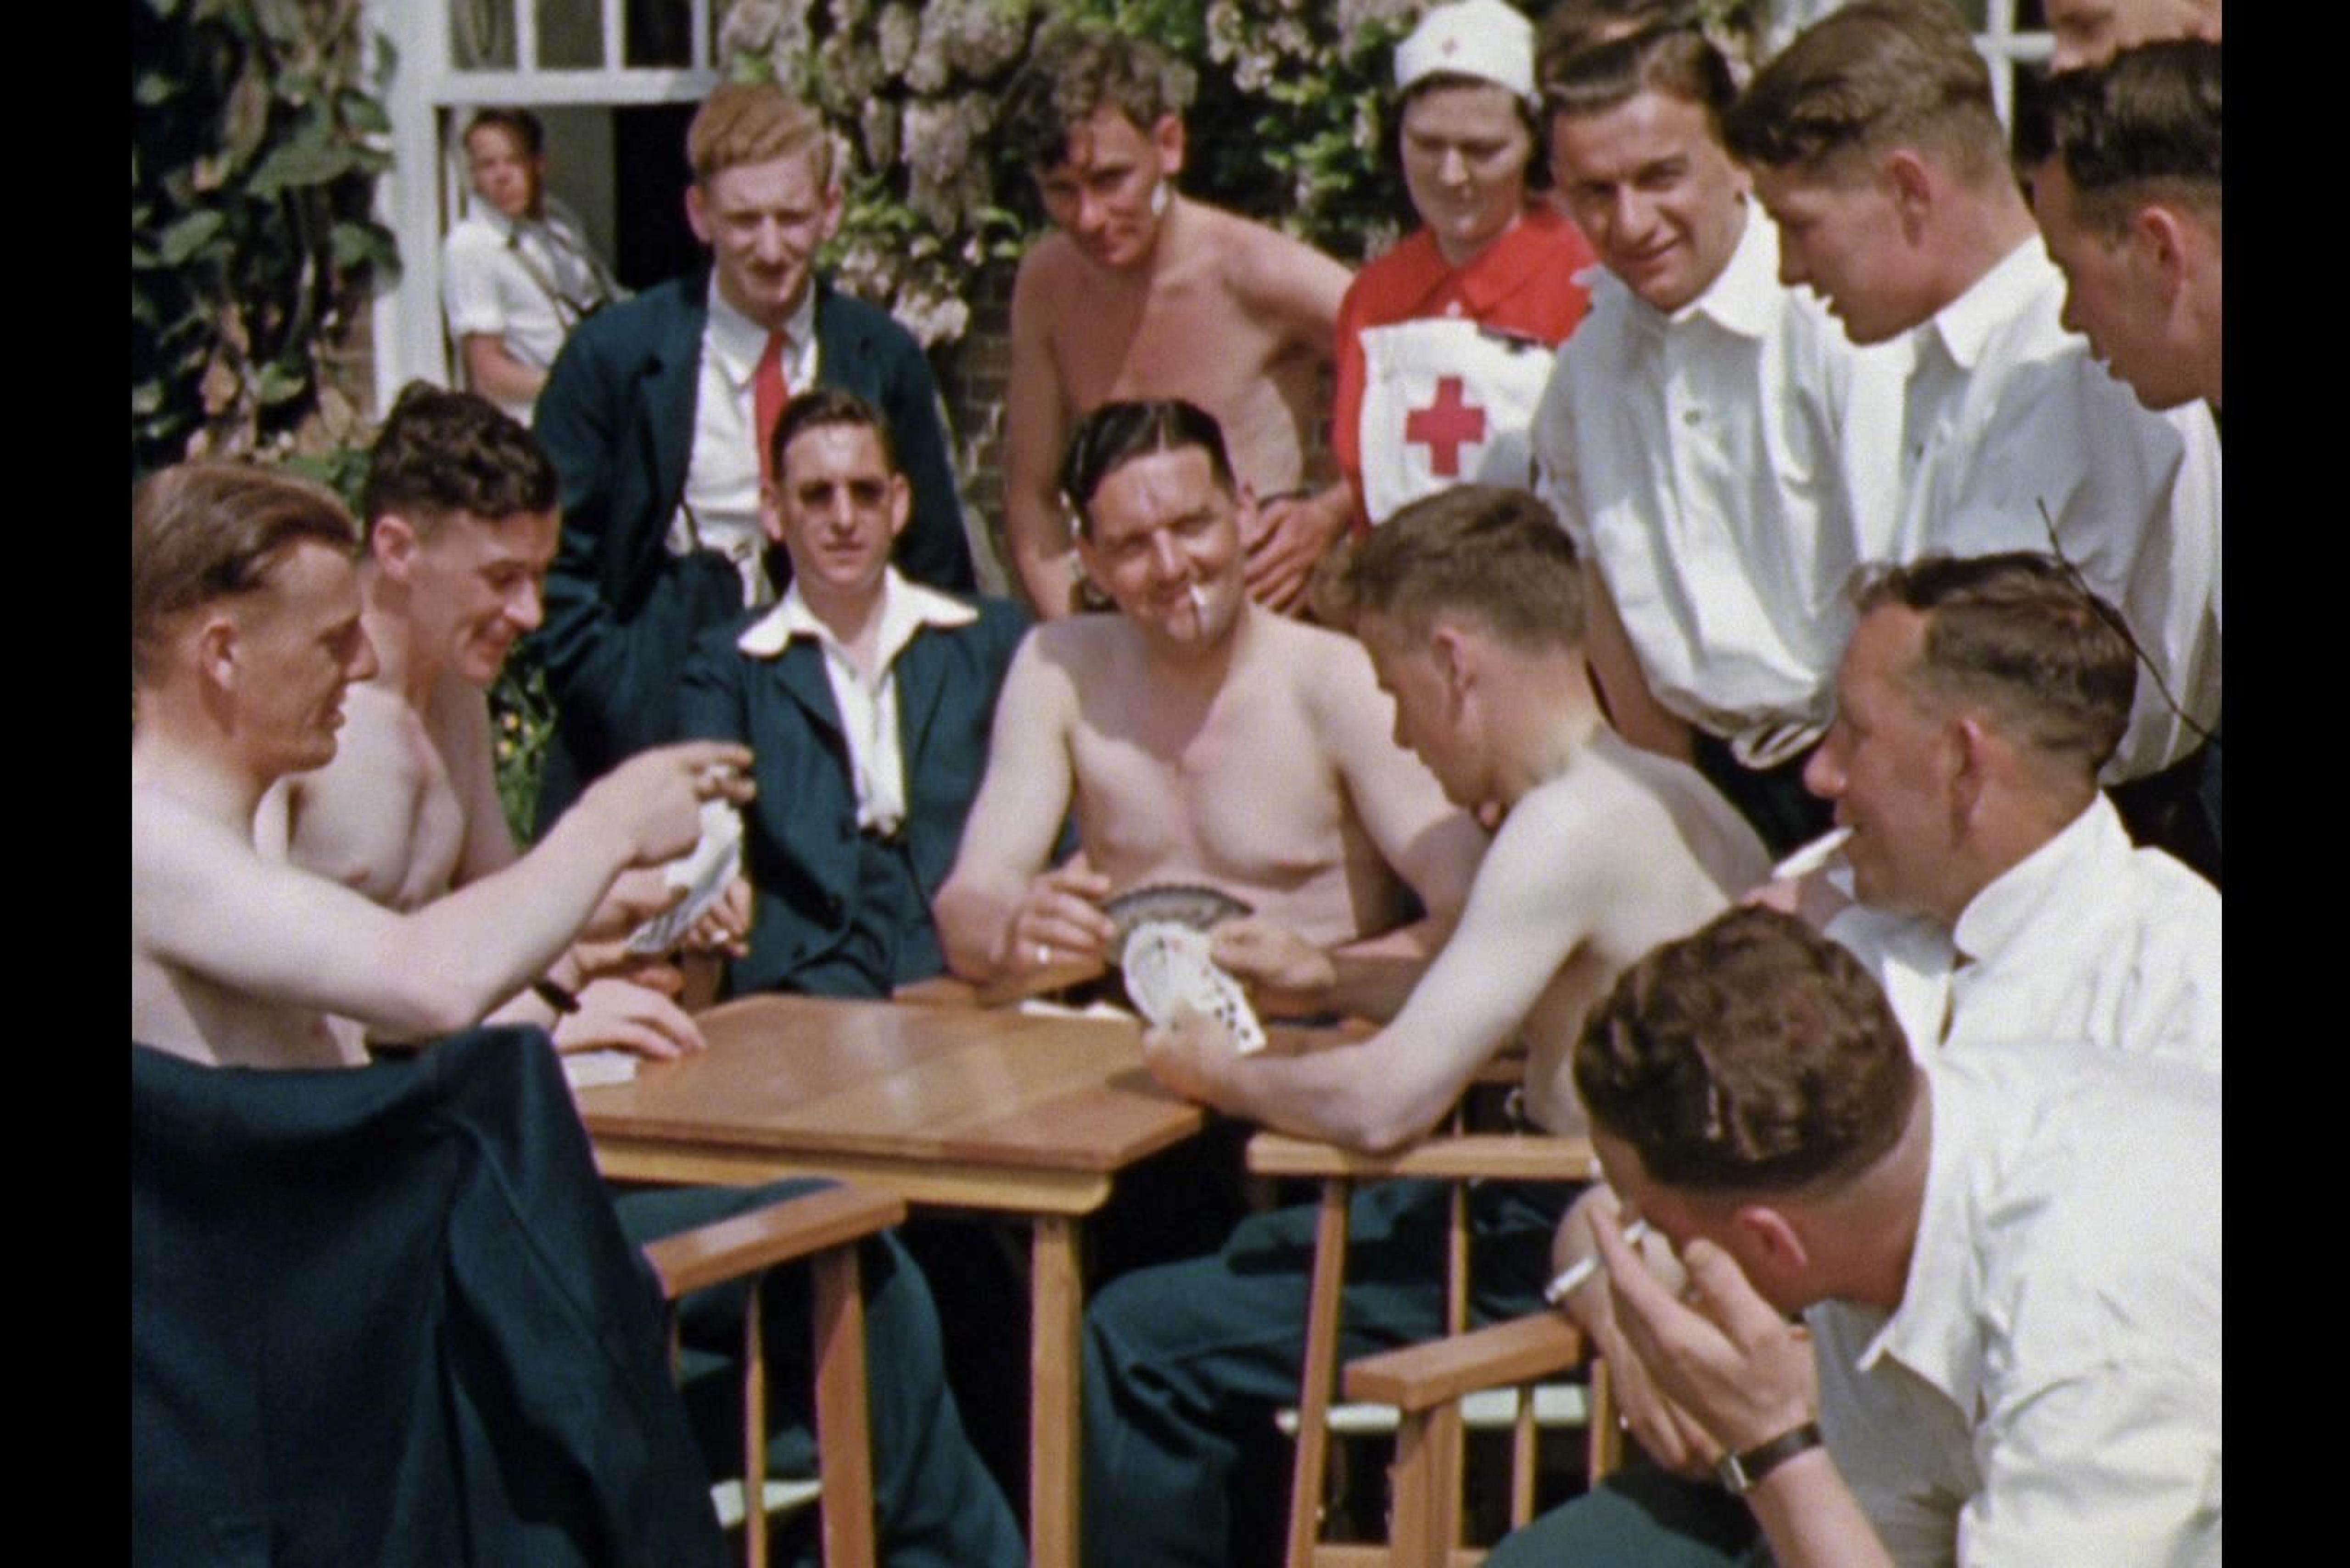 In a hospital garden: several bare-chested men are sitting around a table playing cards. Around them are several men and nurses watching.